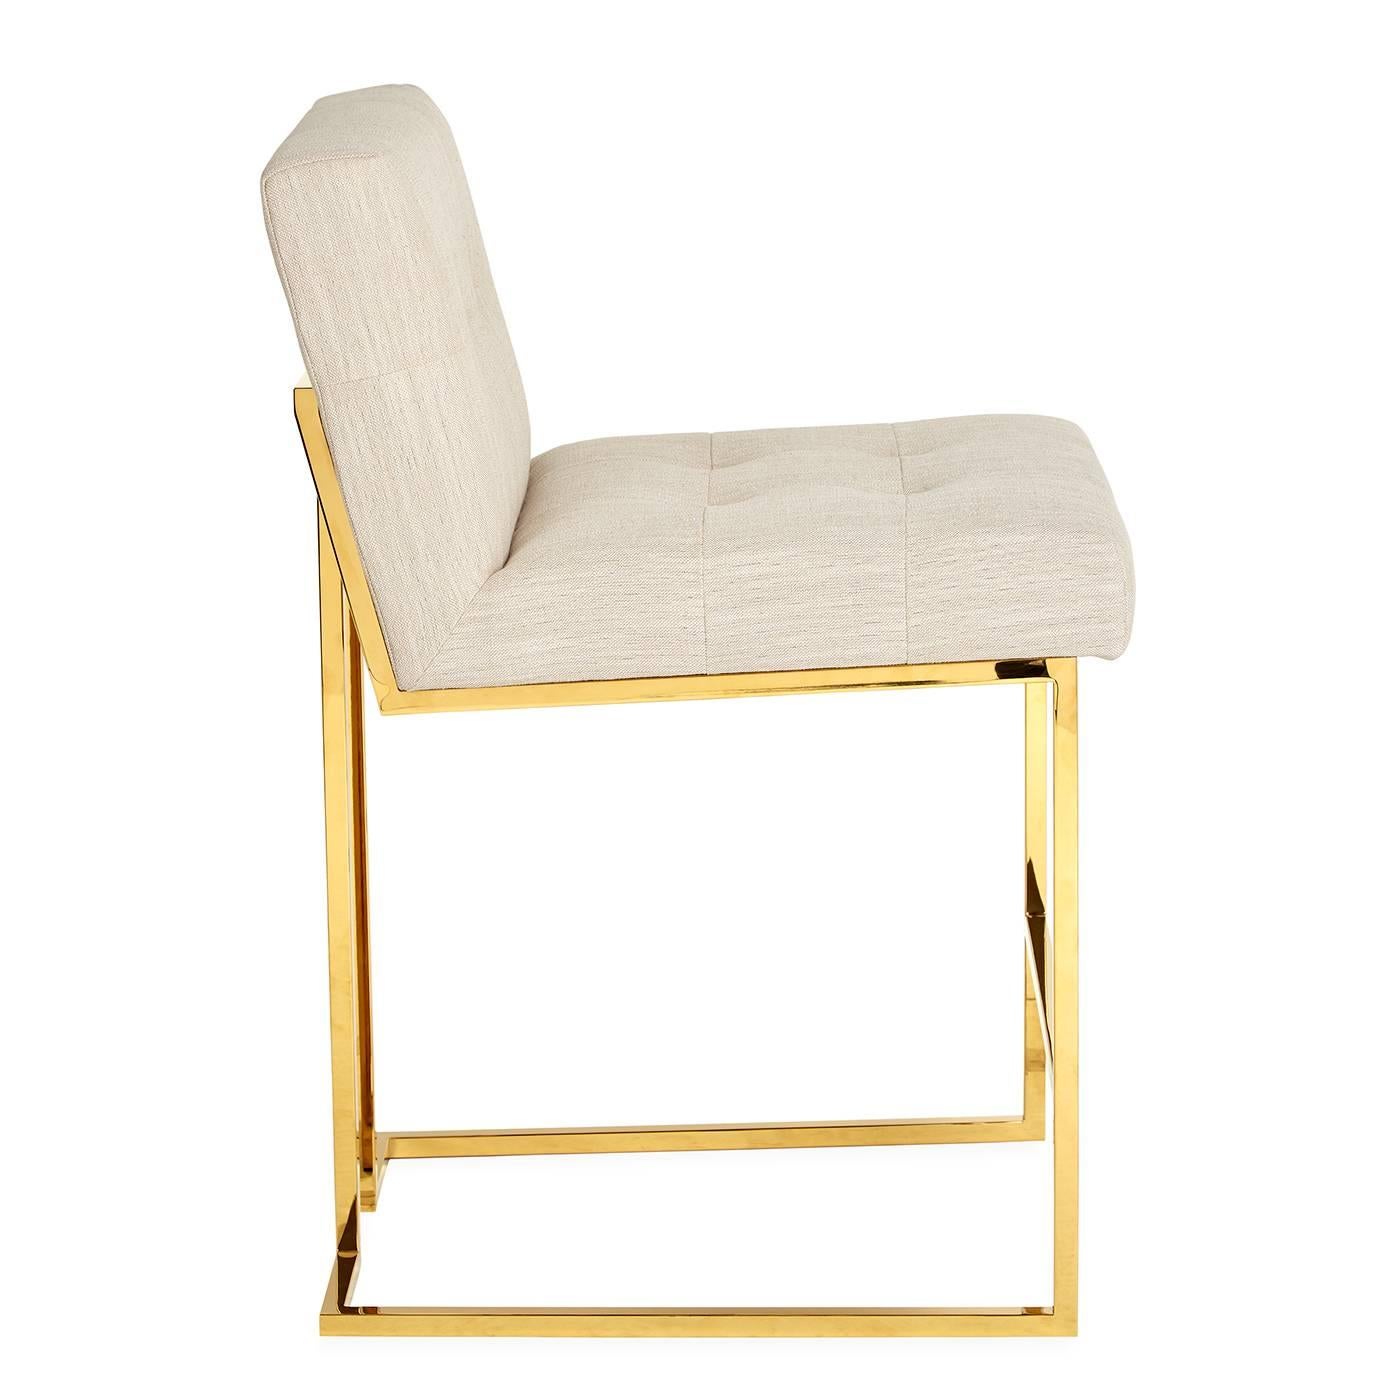 Minimalist comfort. Pared down geometry. Polished brass meets chic comfort in our Goldfinger collection. Our Goldfinger counter stool looks as good from the back as it does from the front in luxe Roma Oatmeal linen. A little bit 1970s, a lot today.